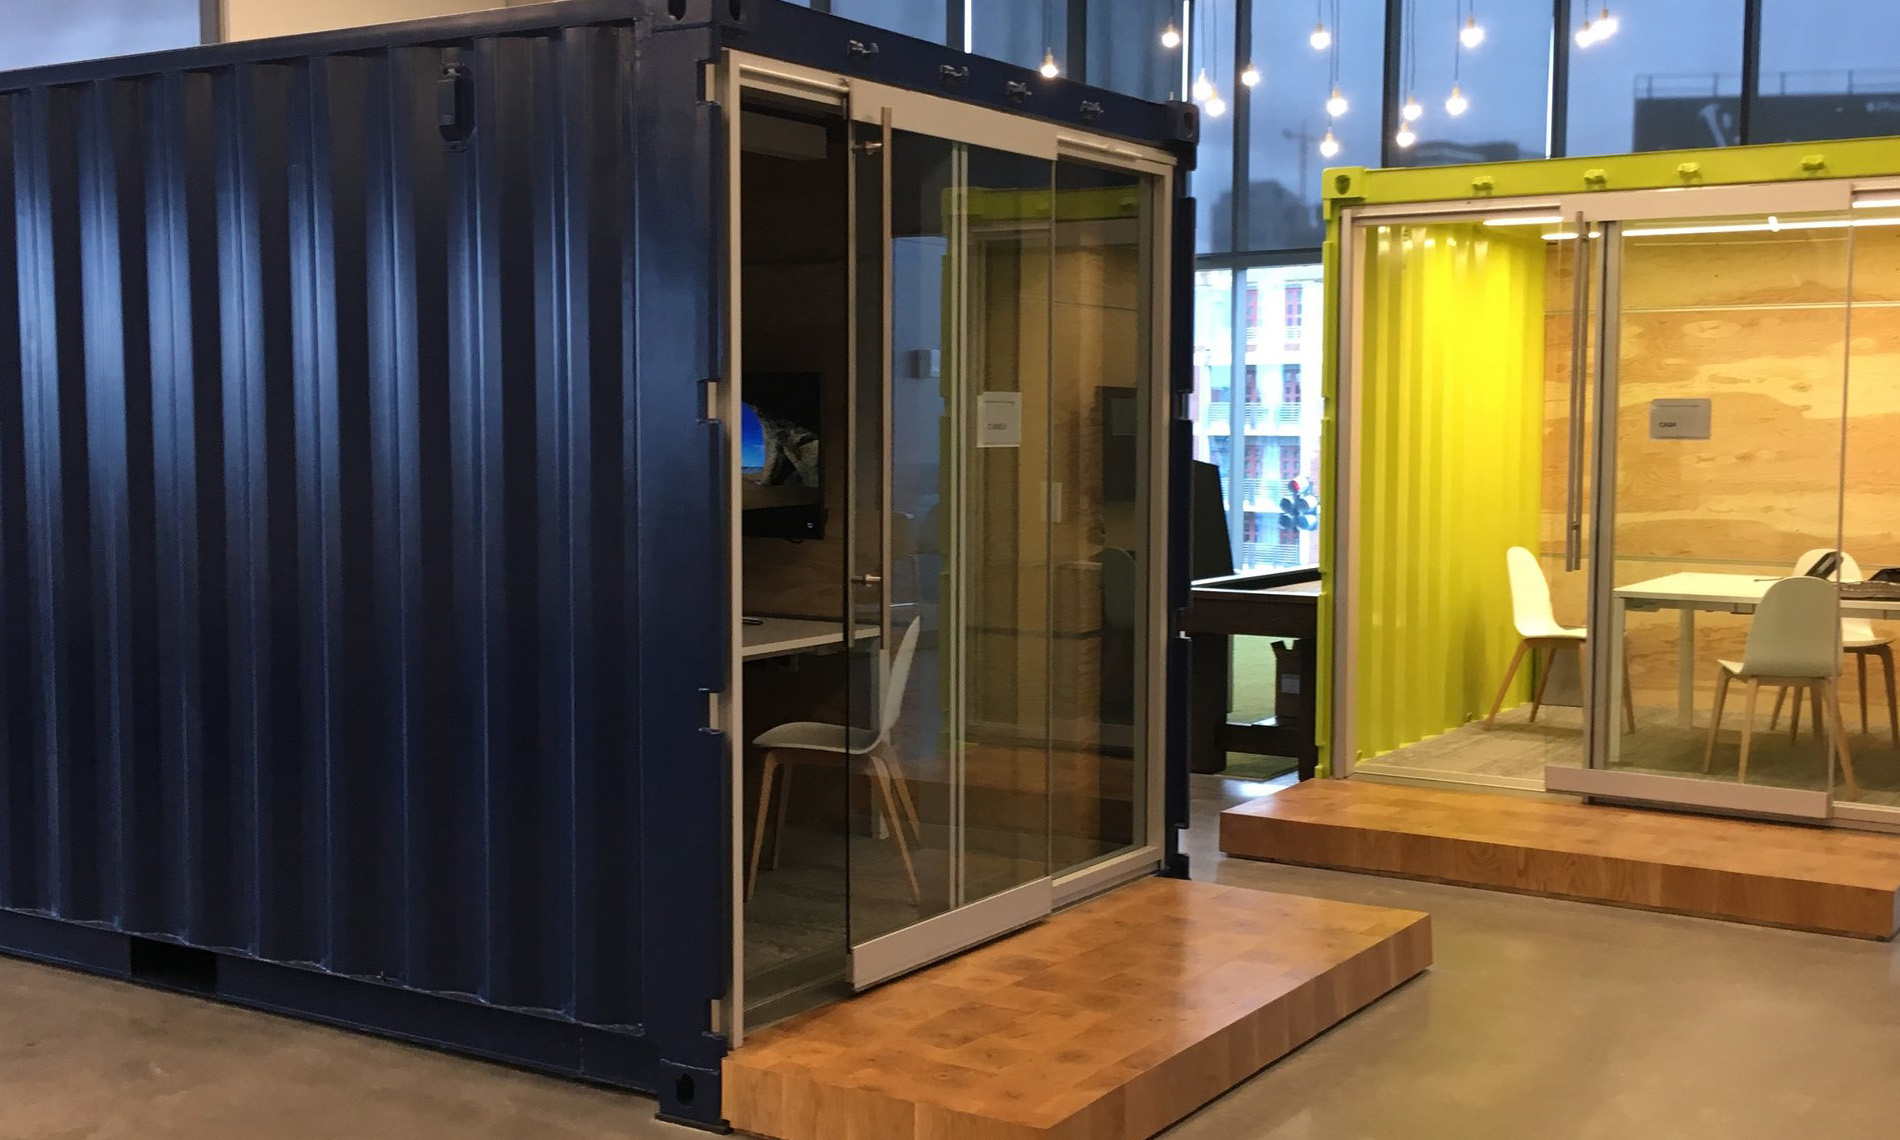 Is it a Shipping Container or a Private Office?